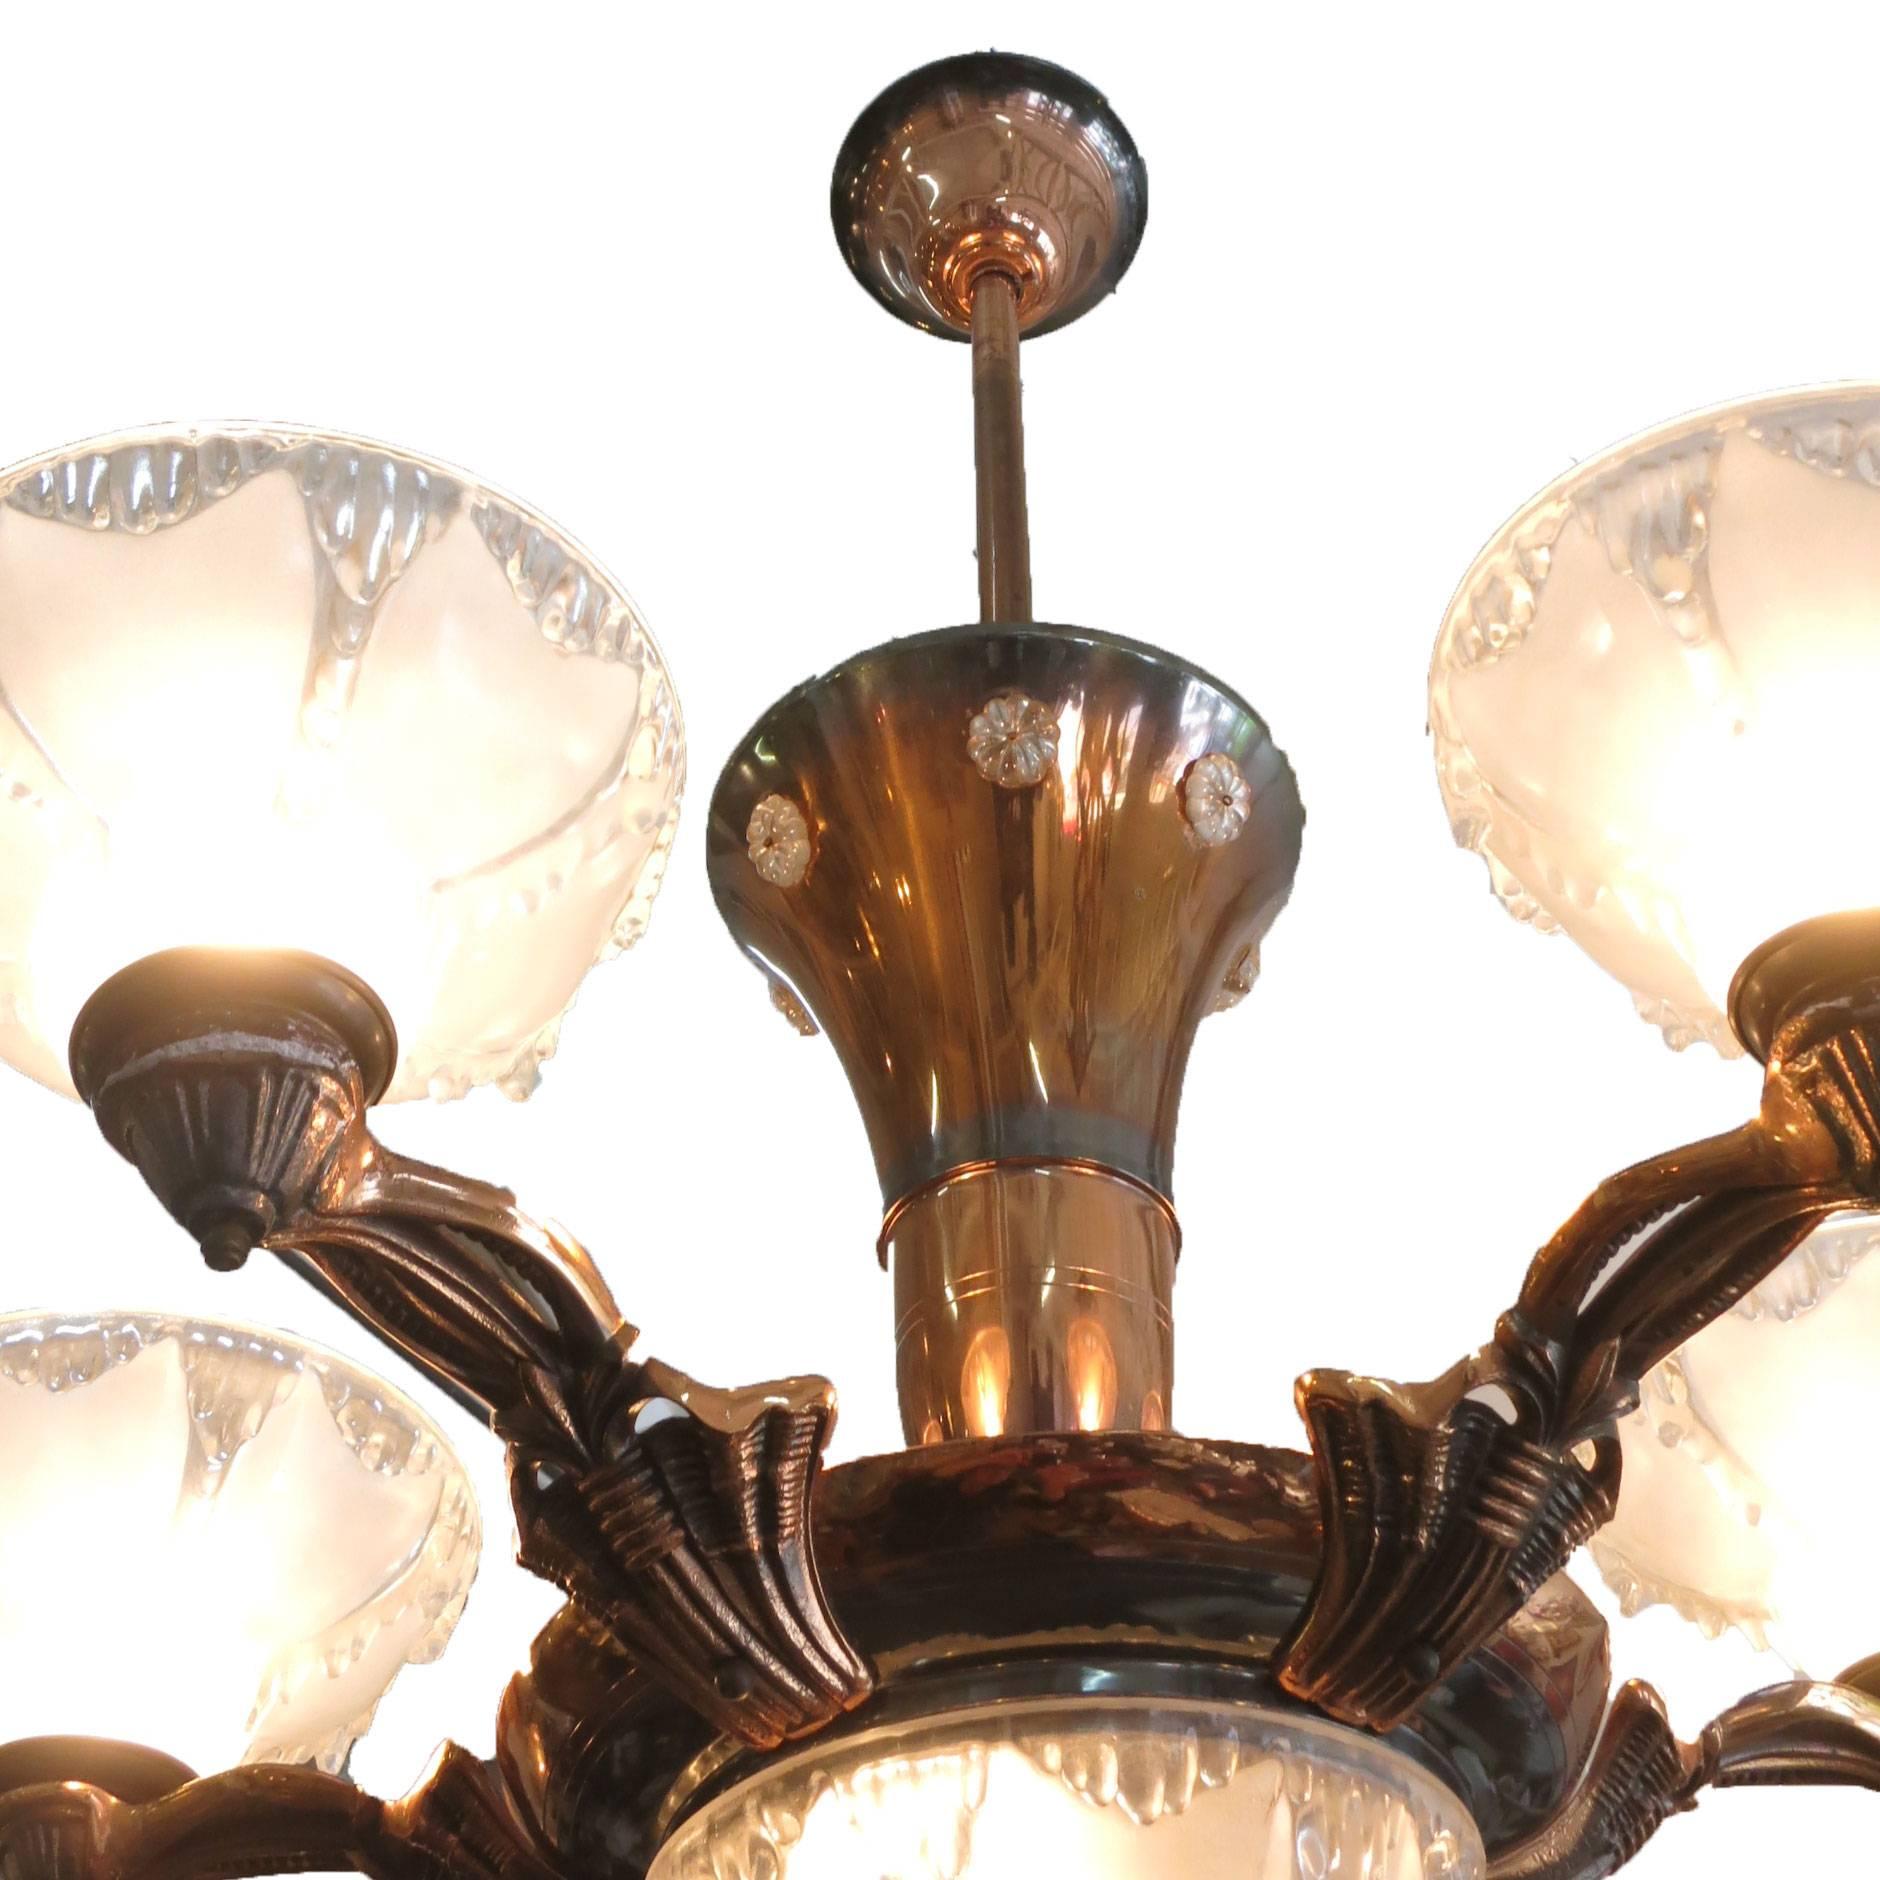 This Art Deco style copper chandelier comes with a five-arm design each containing frosted molded glass shades. Each arm is centred despite the curvaceousness of the multi-tiered centre body. The bronze work also utilizes the 